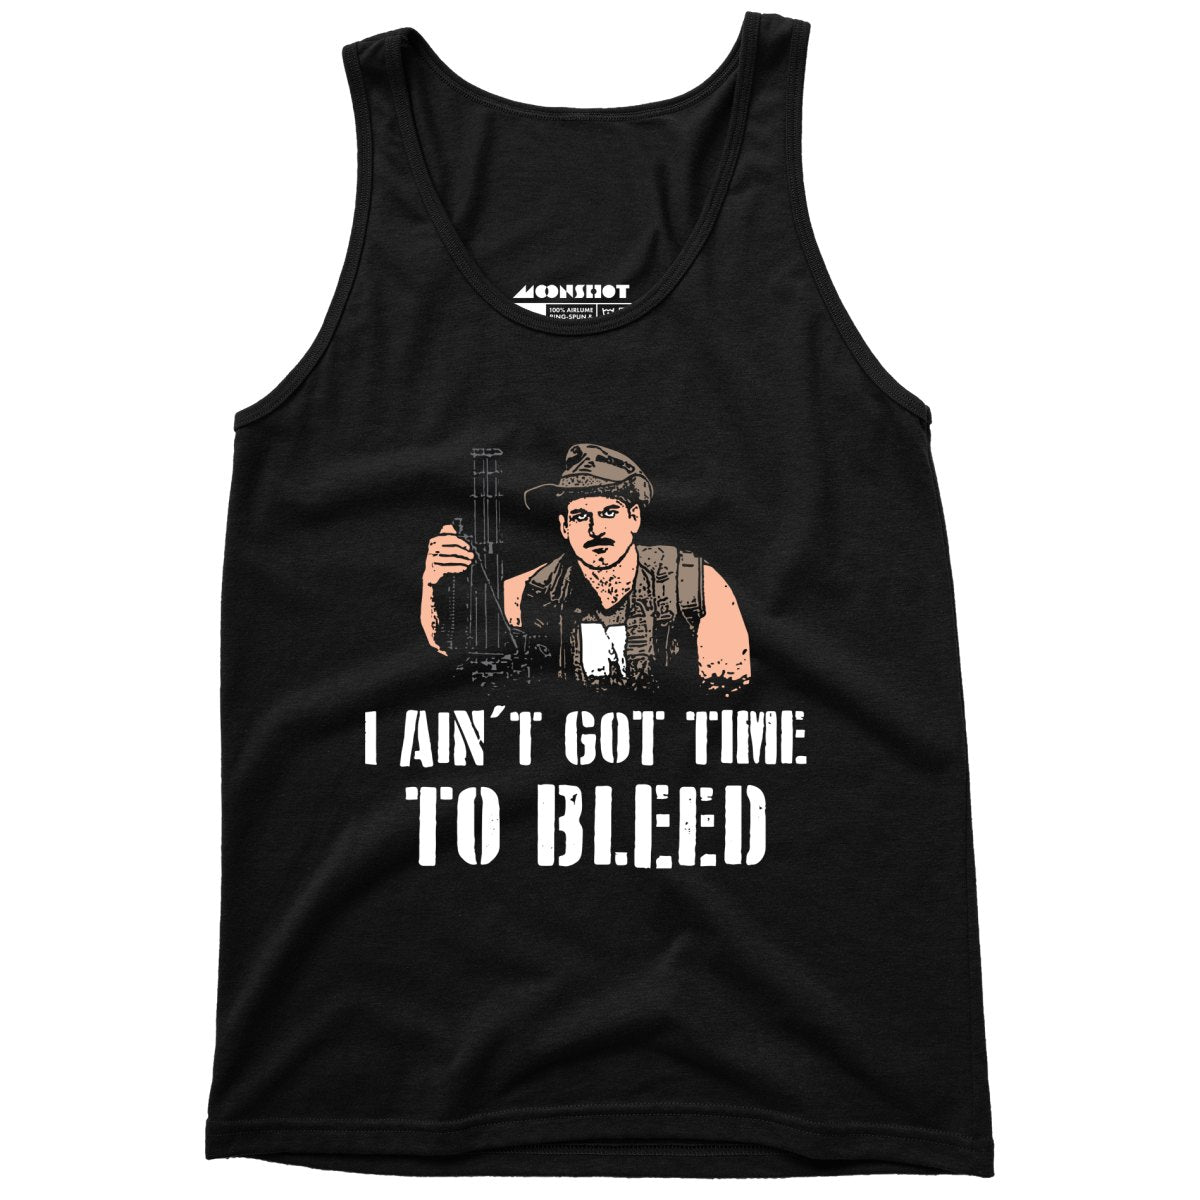 I Ain't Got Time to Bleed - Unisex Tank Top